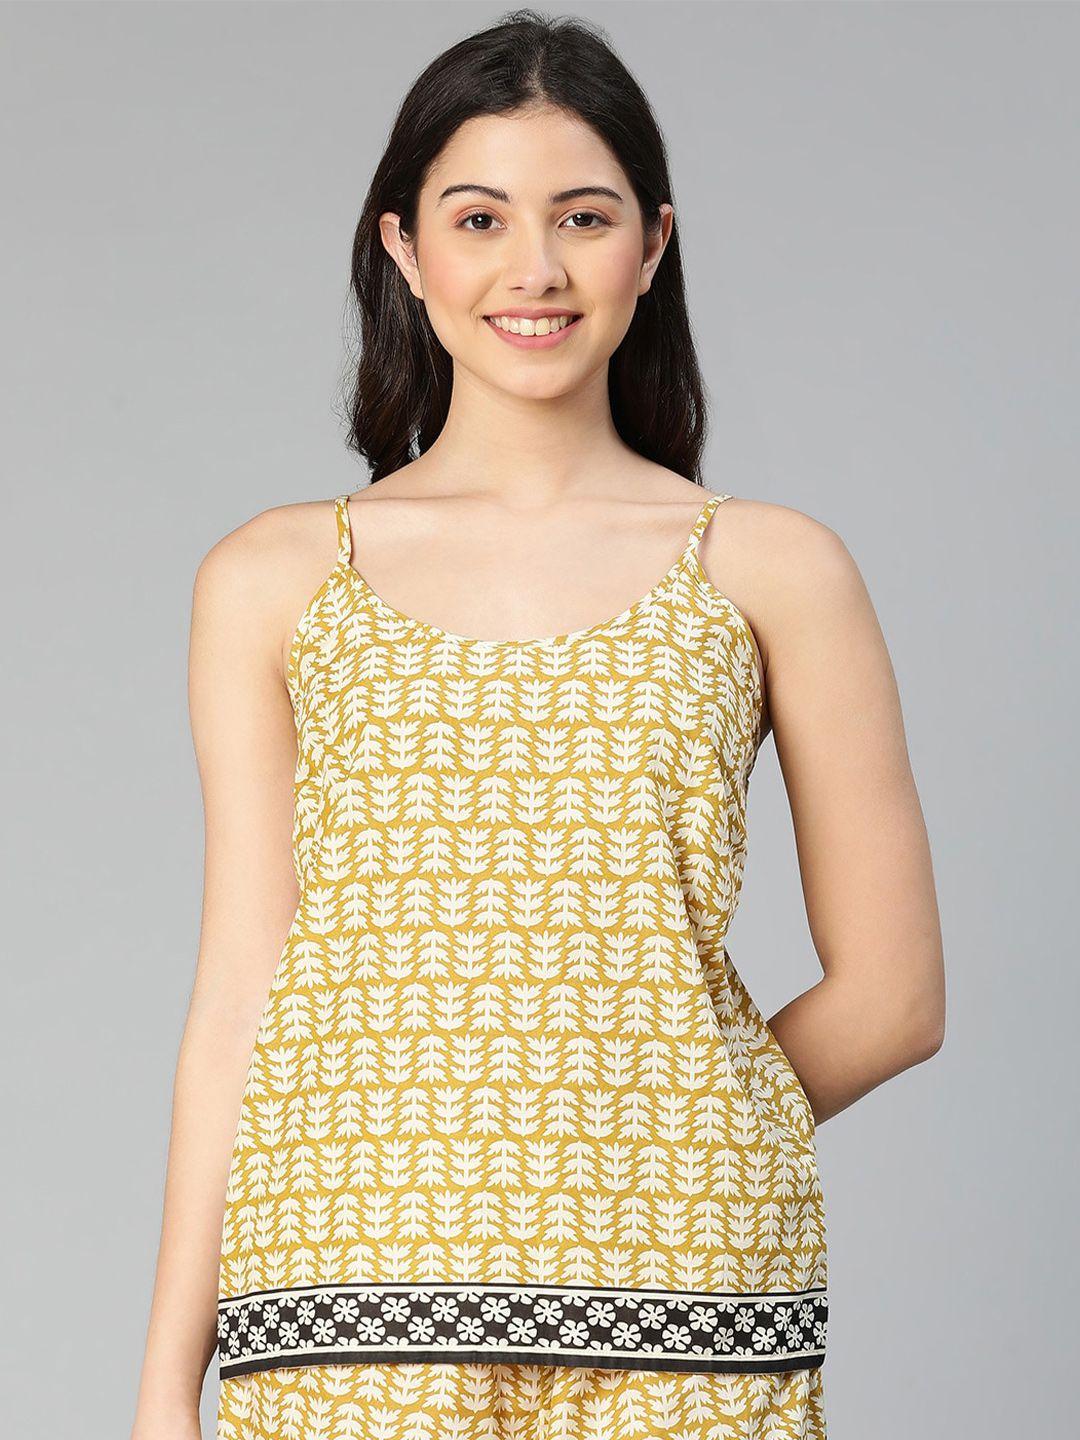 oxolloxo-women-mustard-yellow-floral-printed-cami-top